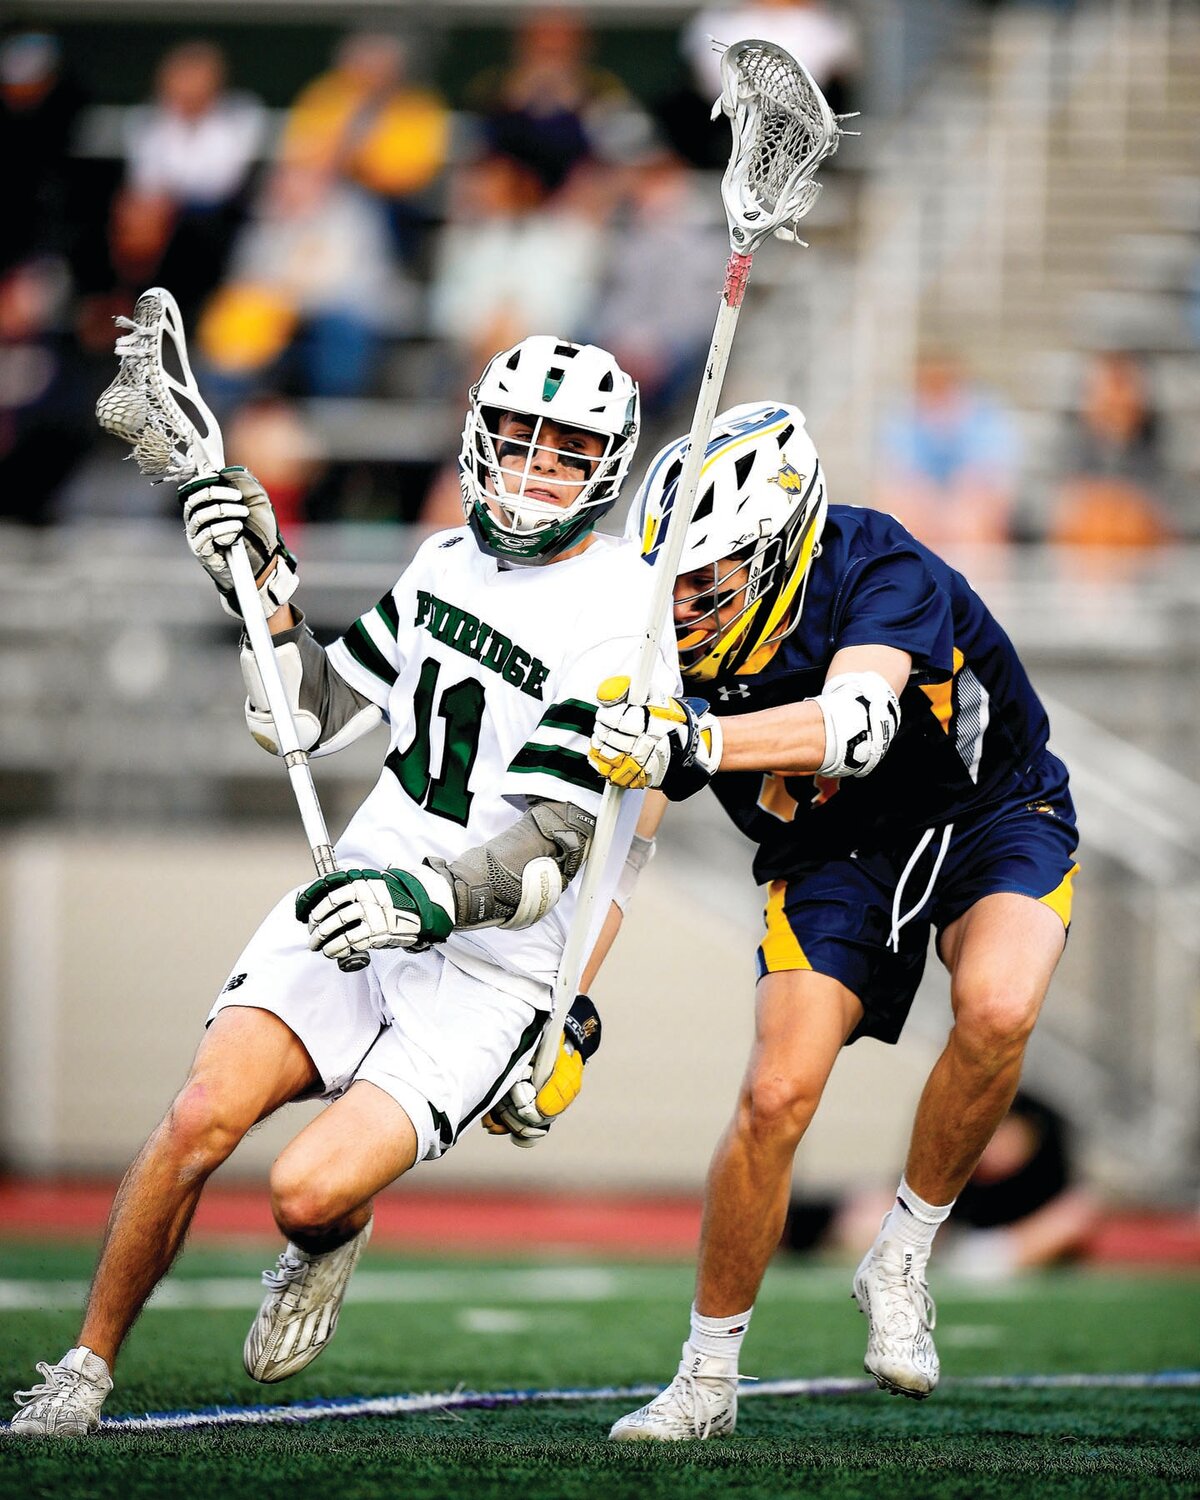 Pennridge’s Matt Kriney gets checked from behind by Wissahickon’s Dan Hussa while attempting to get off a shot.